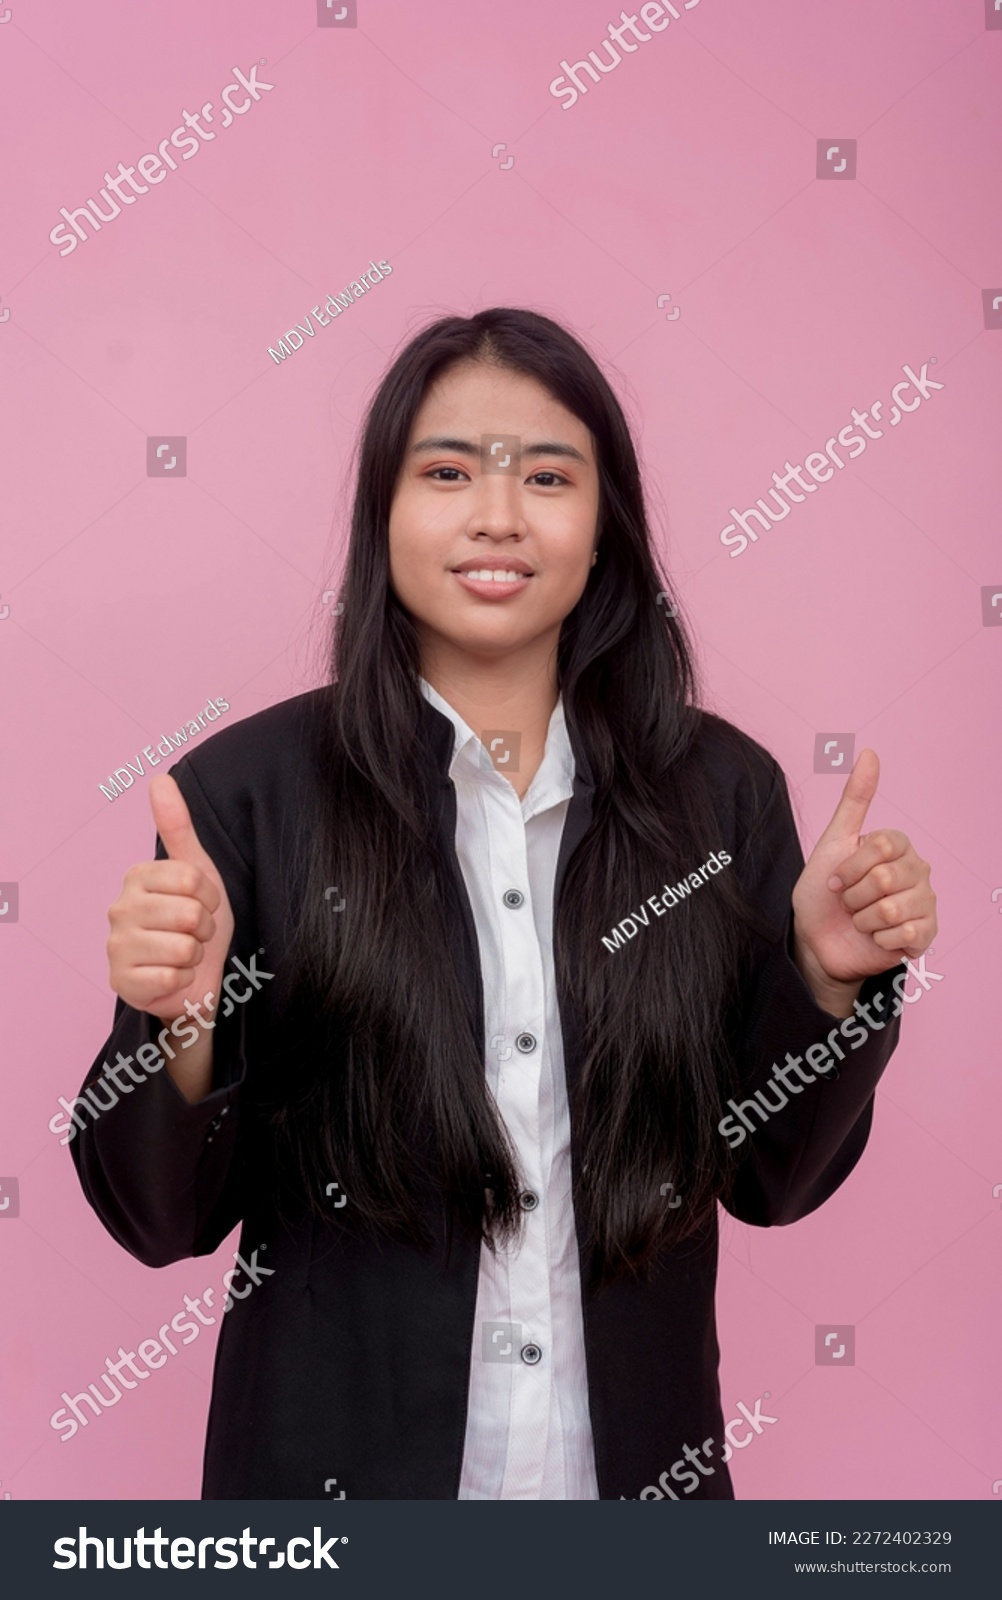 A young southeast asian female employee in a black jacket with arms crossed. Isolated on a light pink background. #2272402329